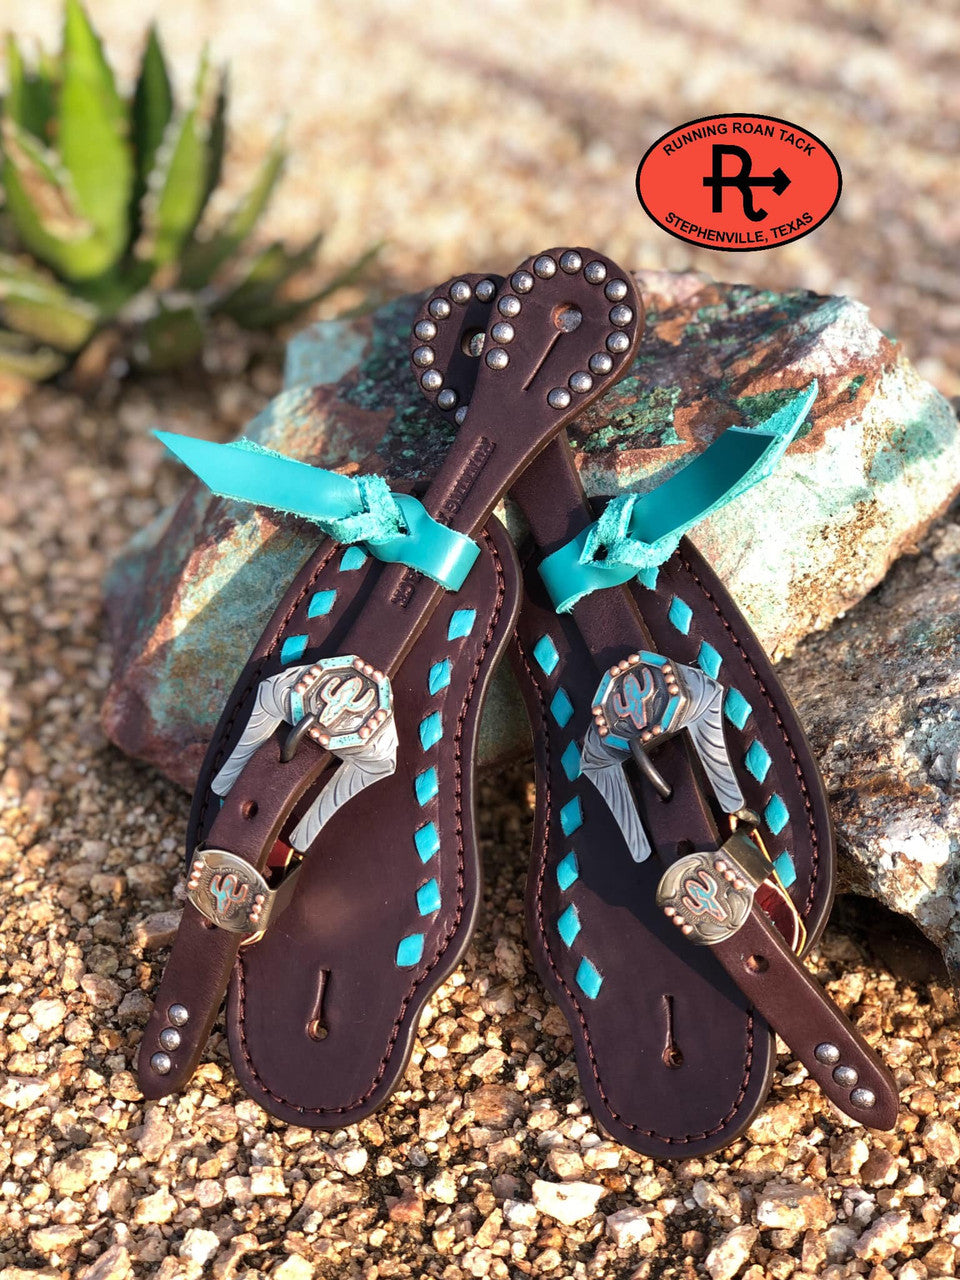 Turquoise Buckstitch Buckaroo Spur Straps with Your Choice of Buckles